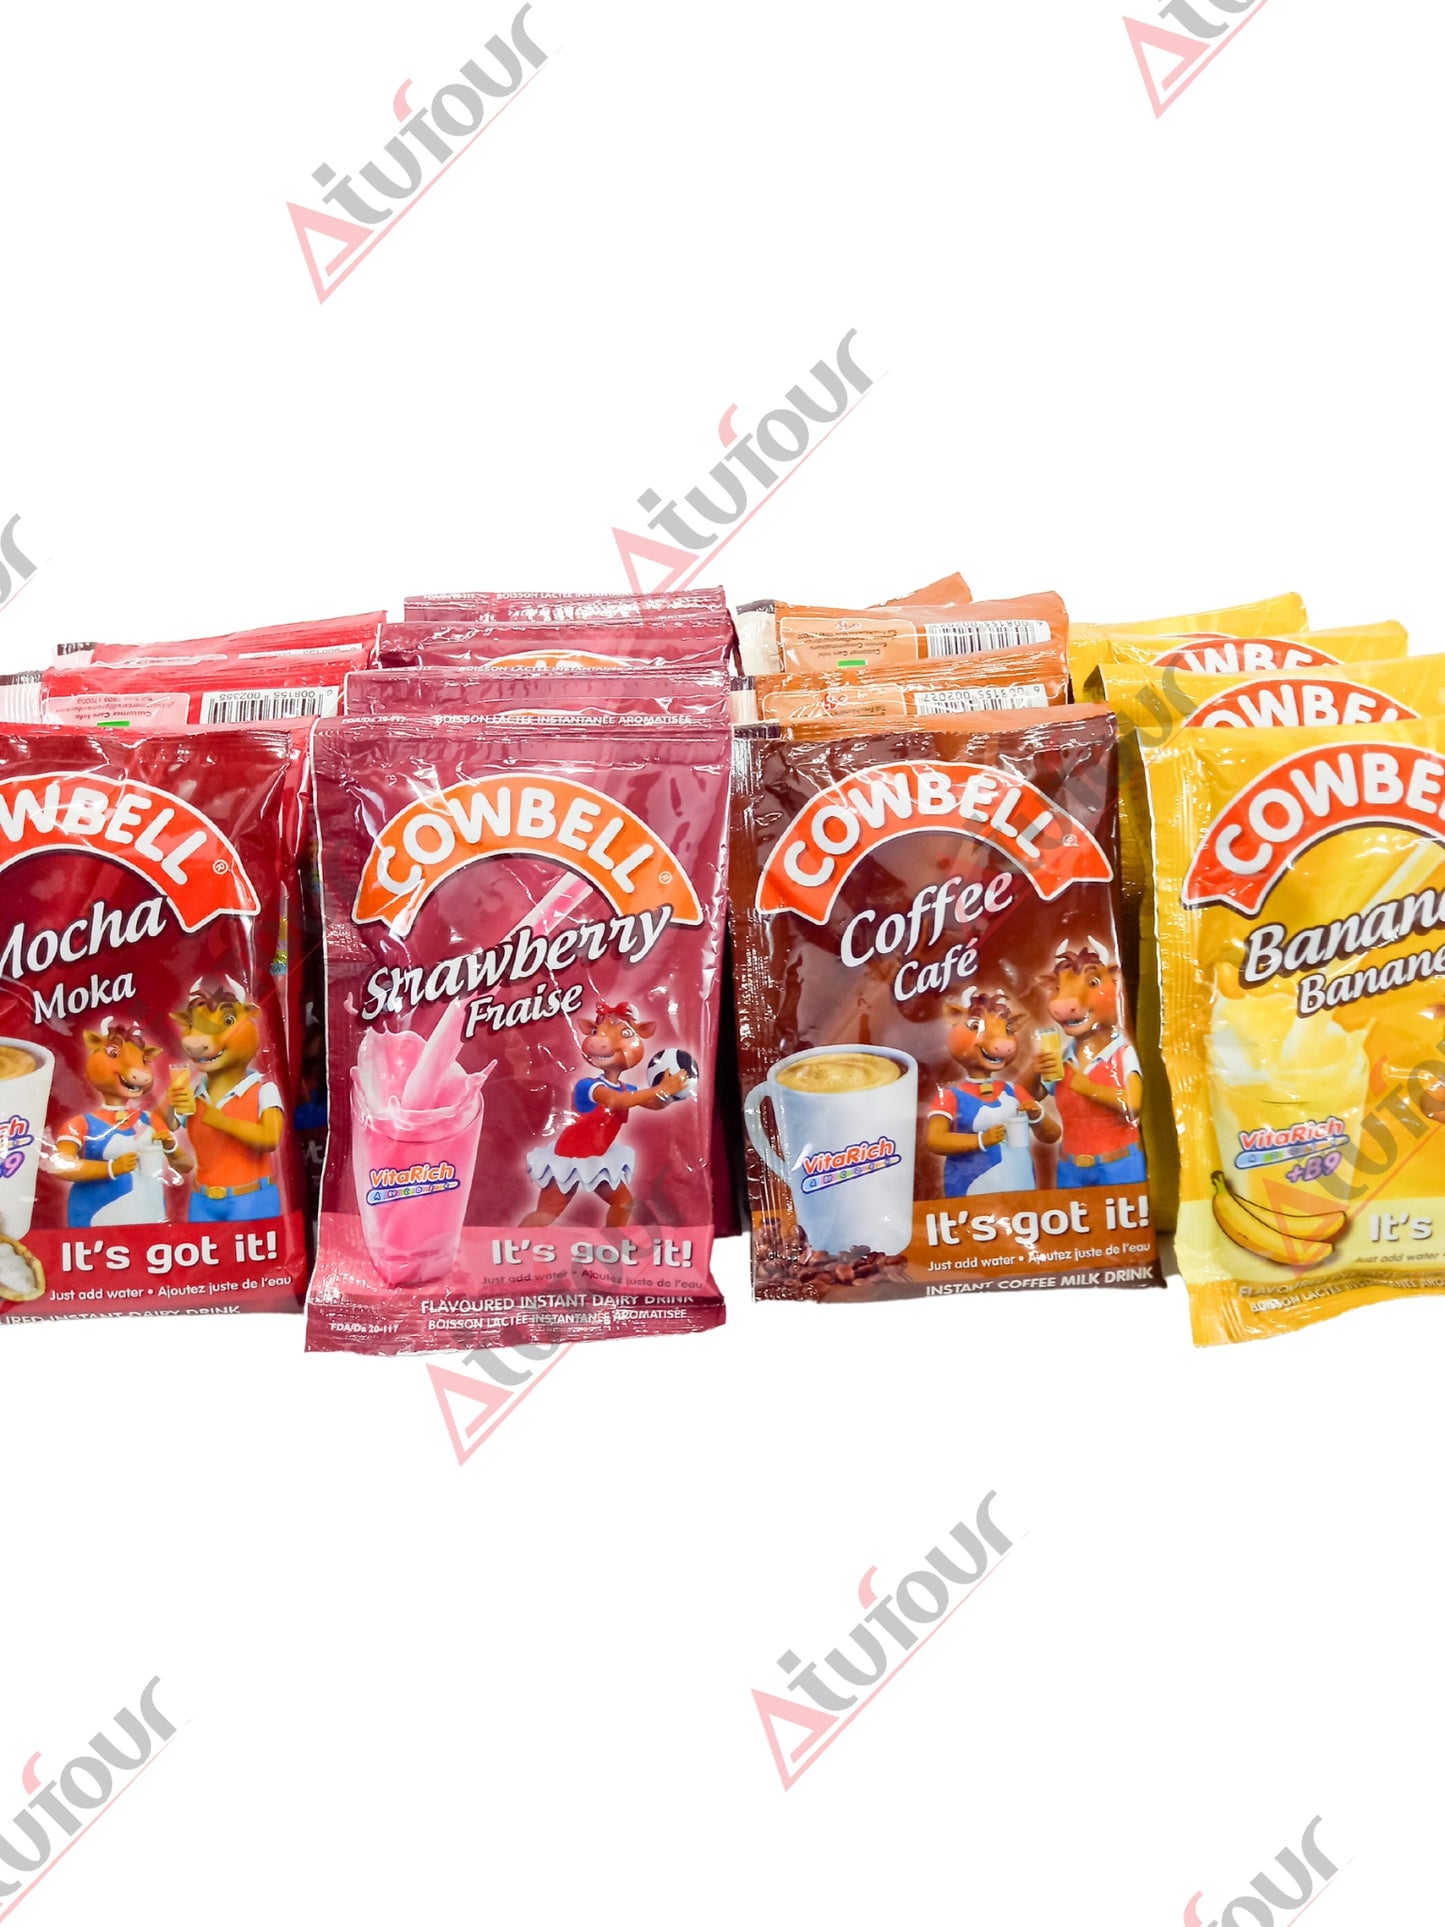 Cowbell Coffee Drink 40g